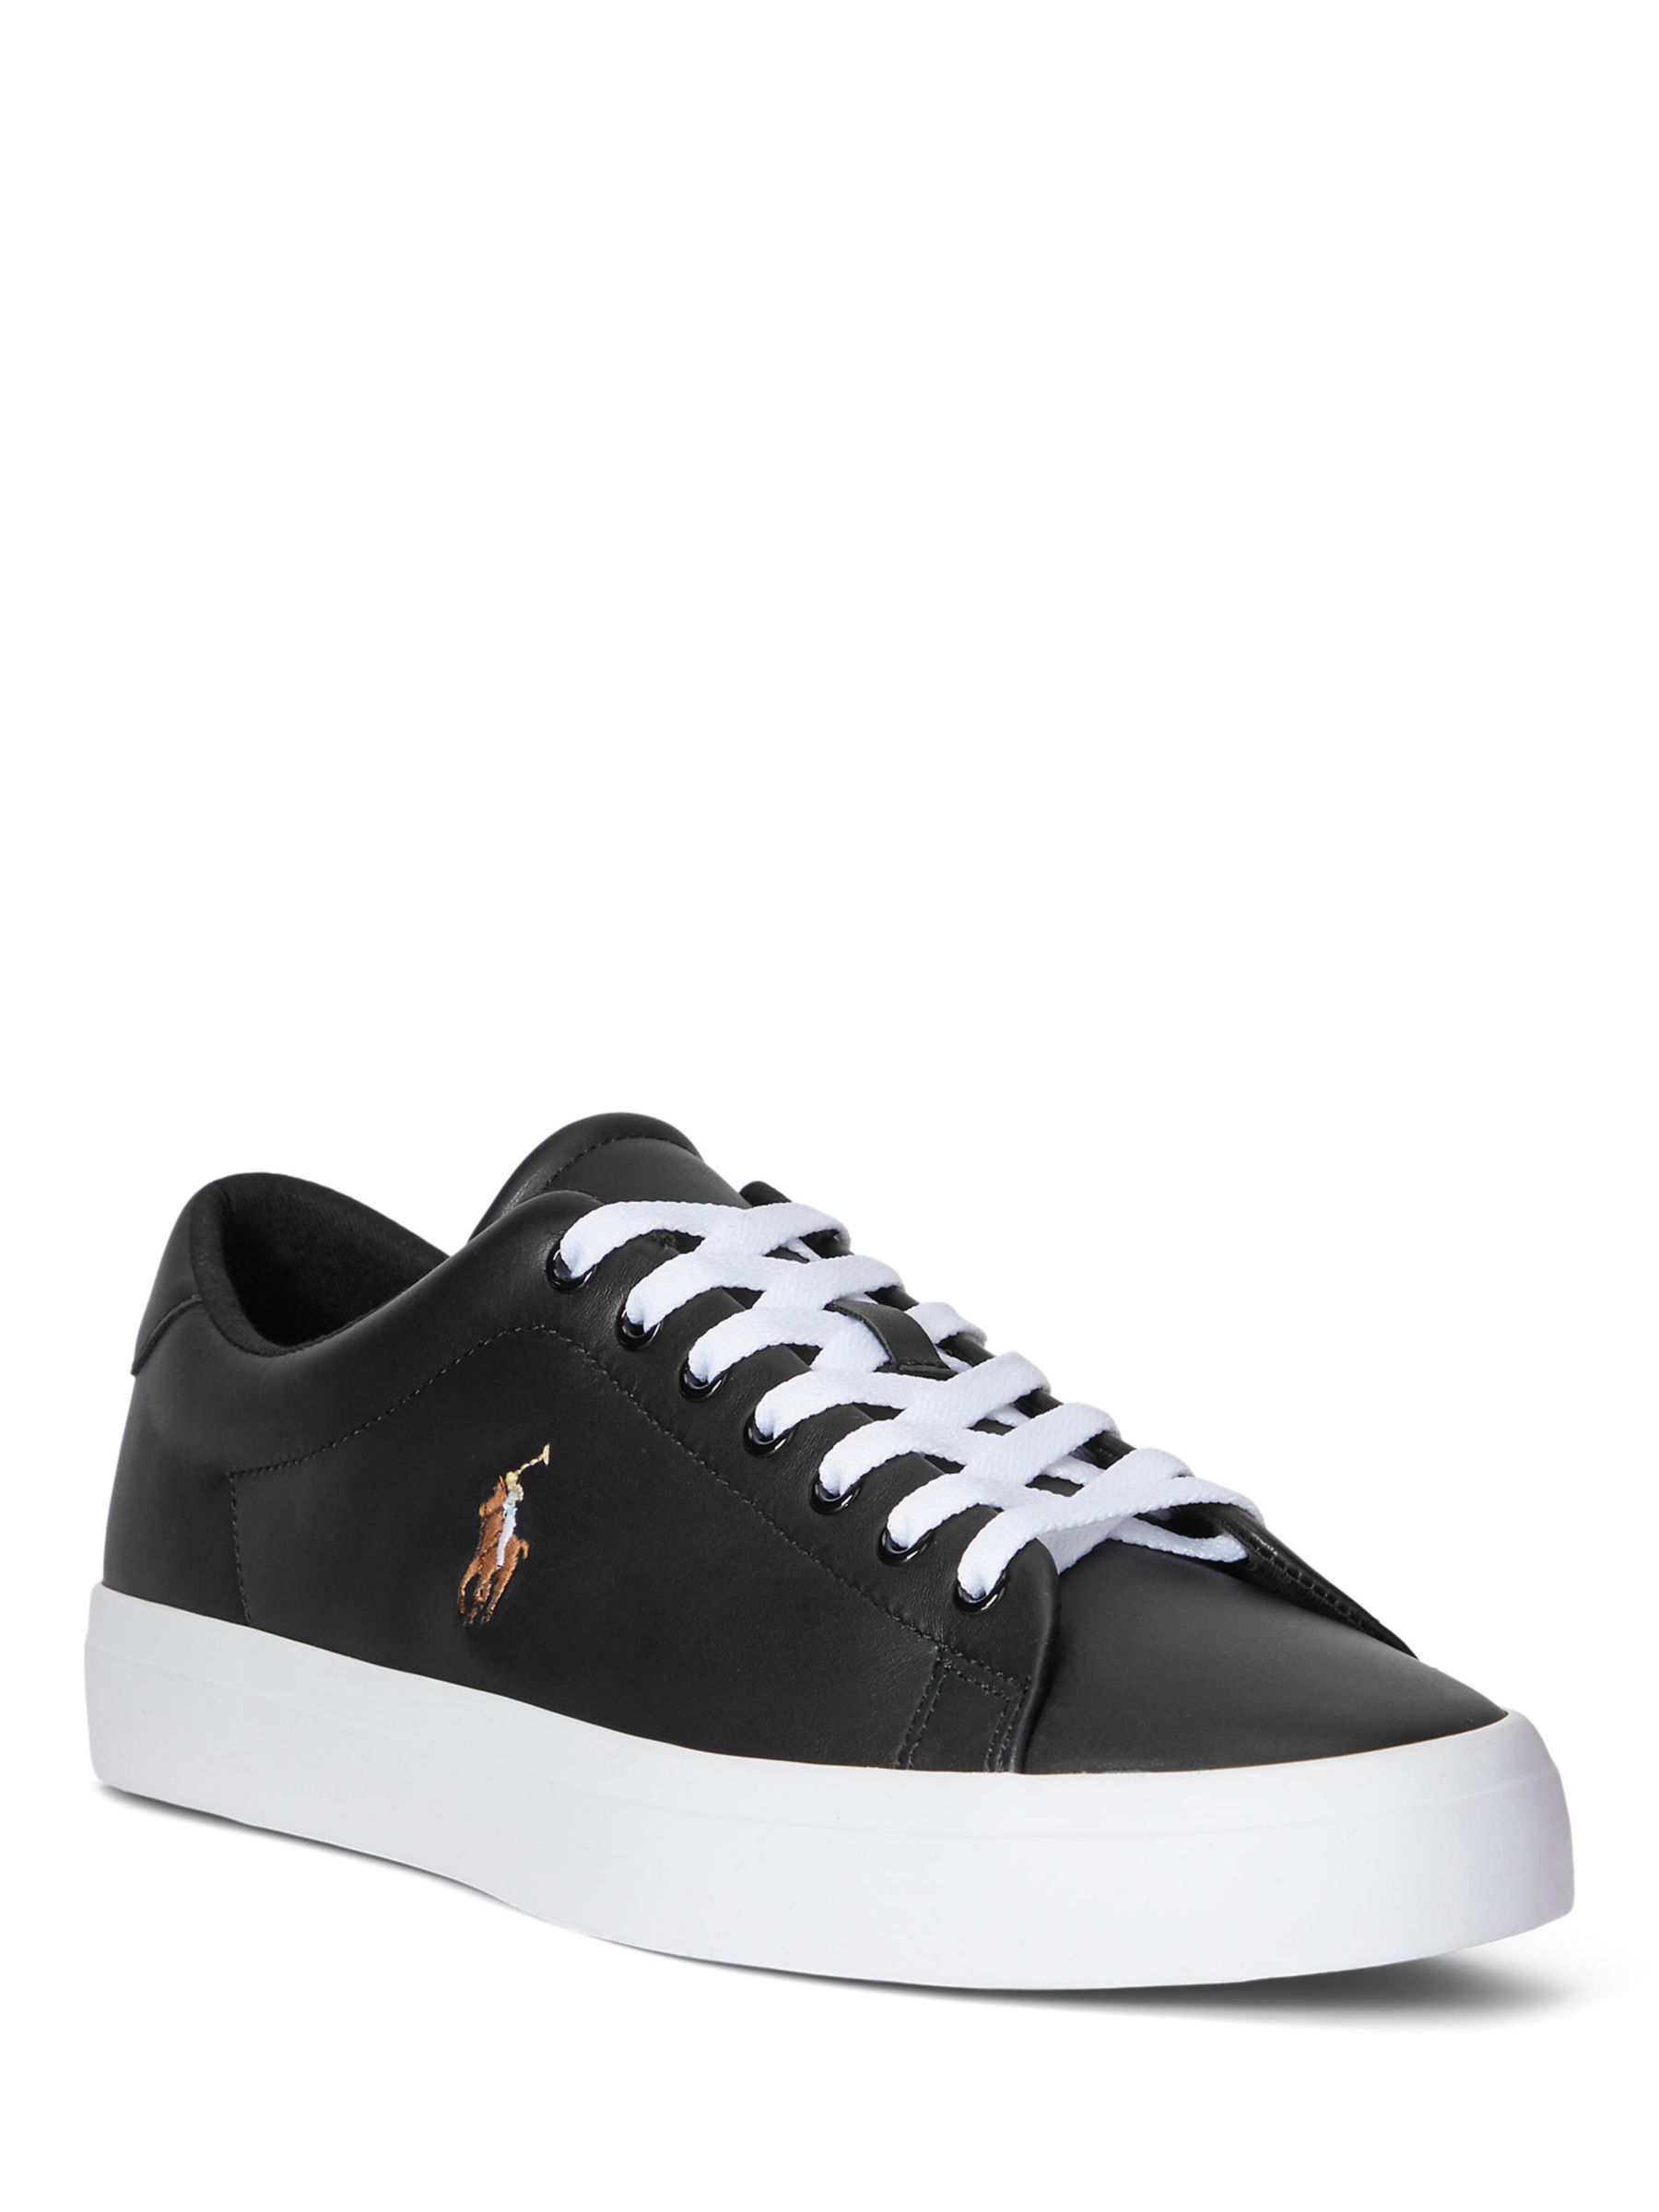 Polo Ralph Lauren Longwood Leather Trainers, Black at John Lewis & Partners